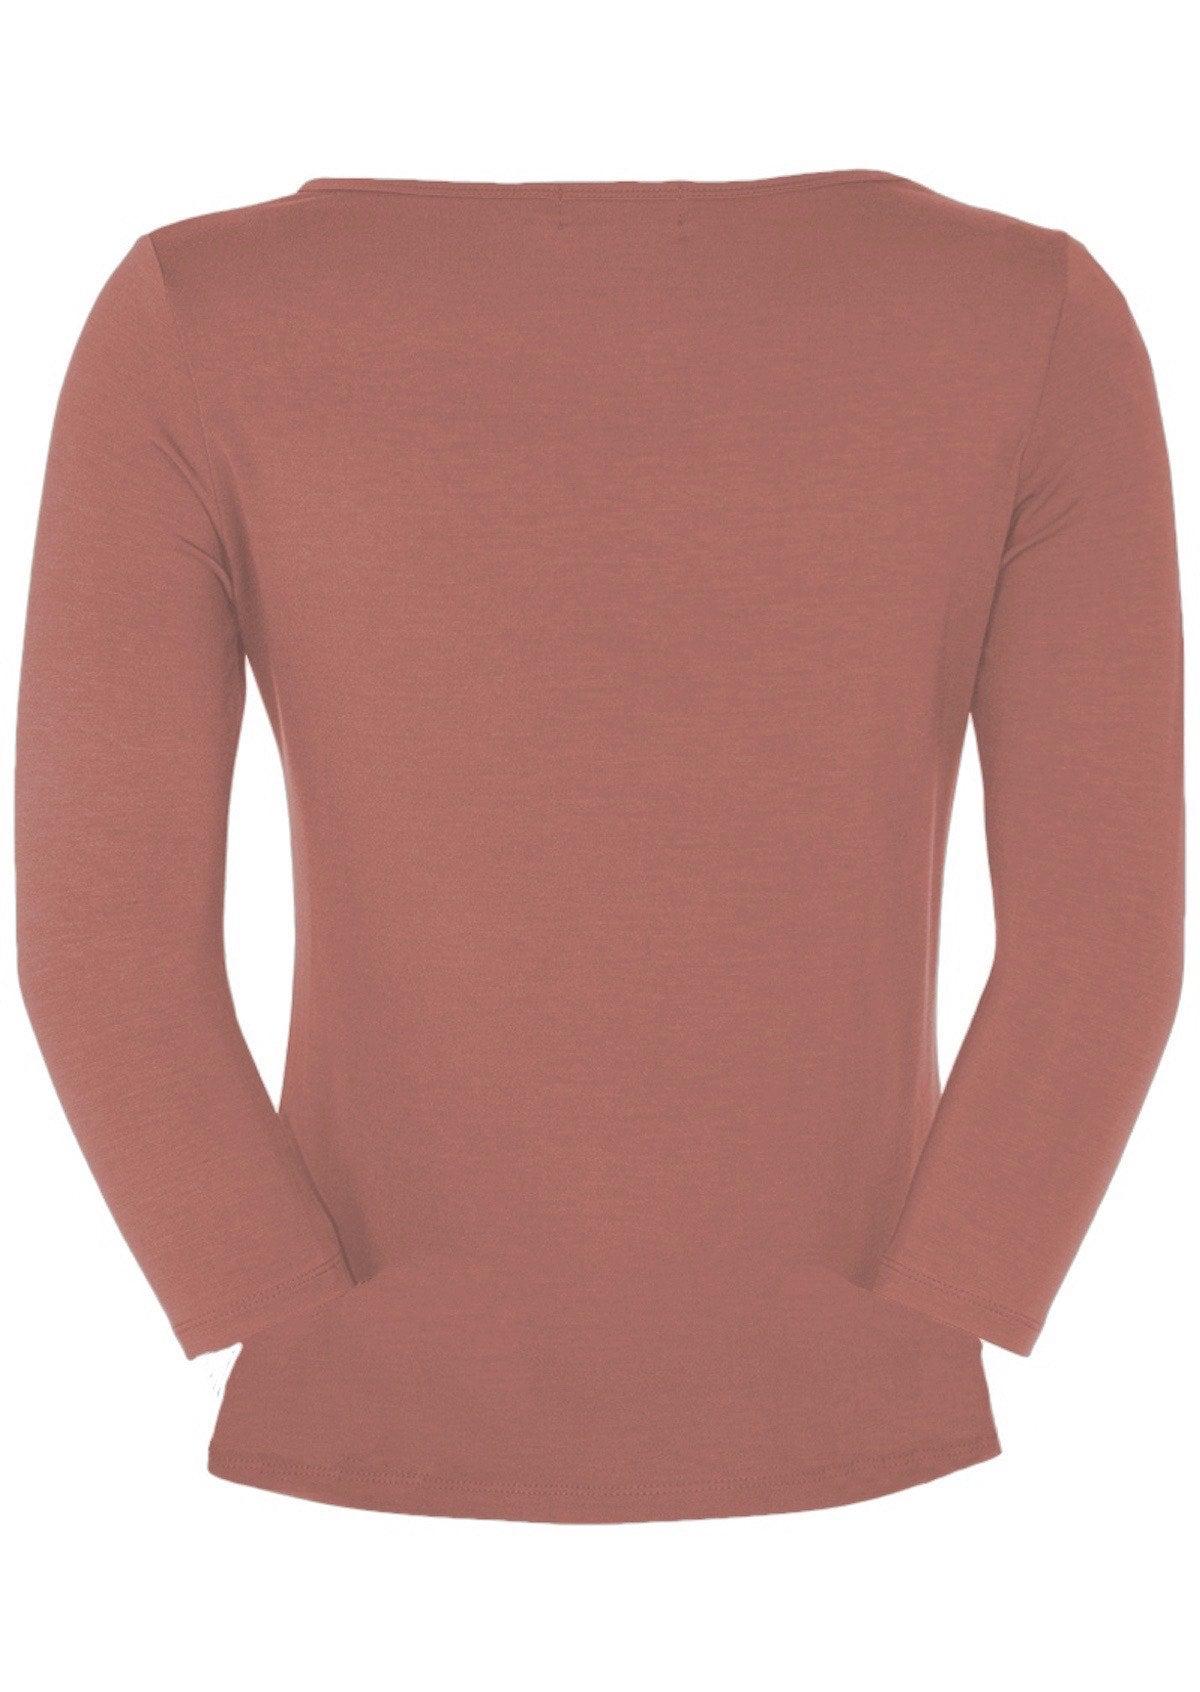 Back view of a women's rayon boat neck dusty pink 3/4 sleeve top.